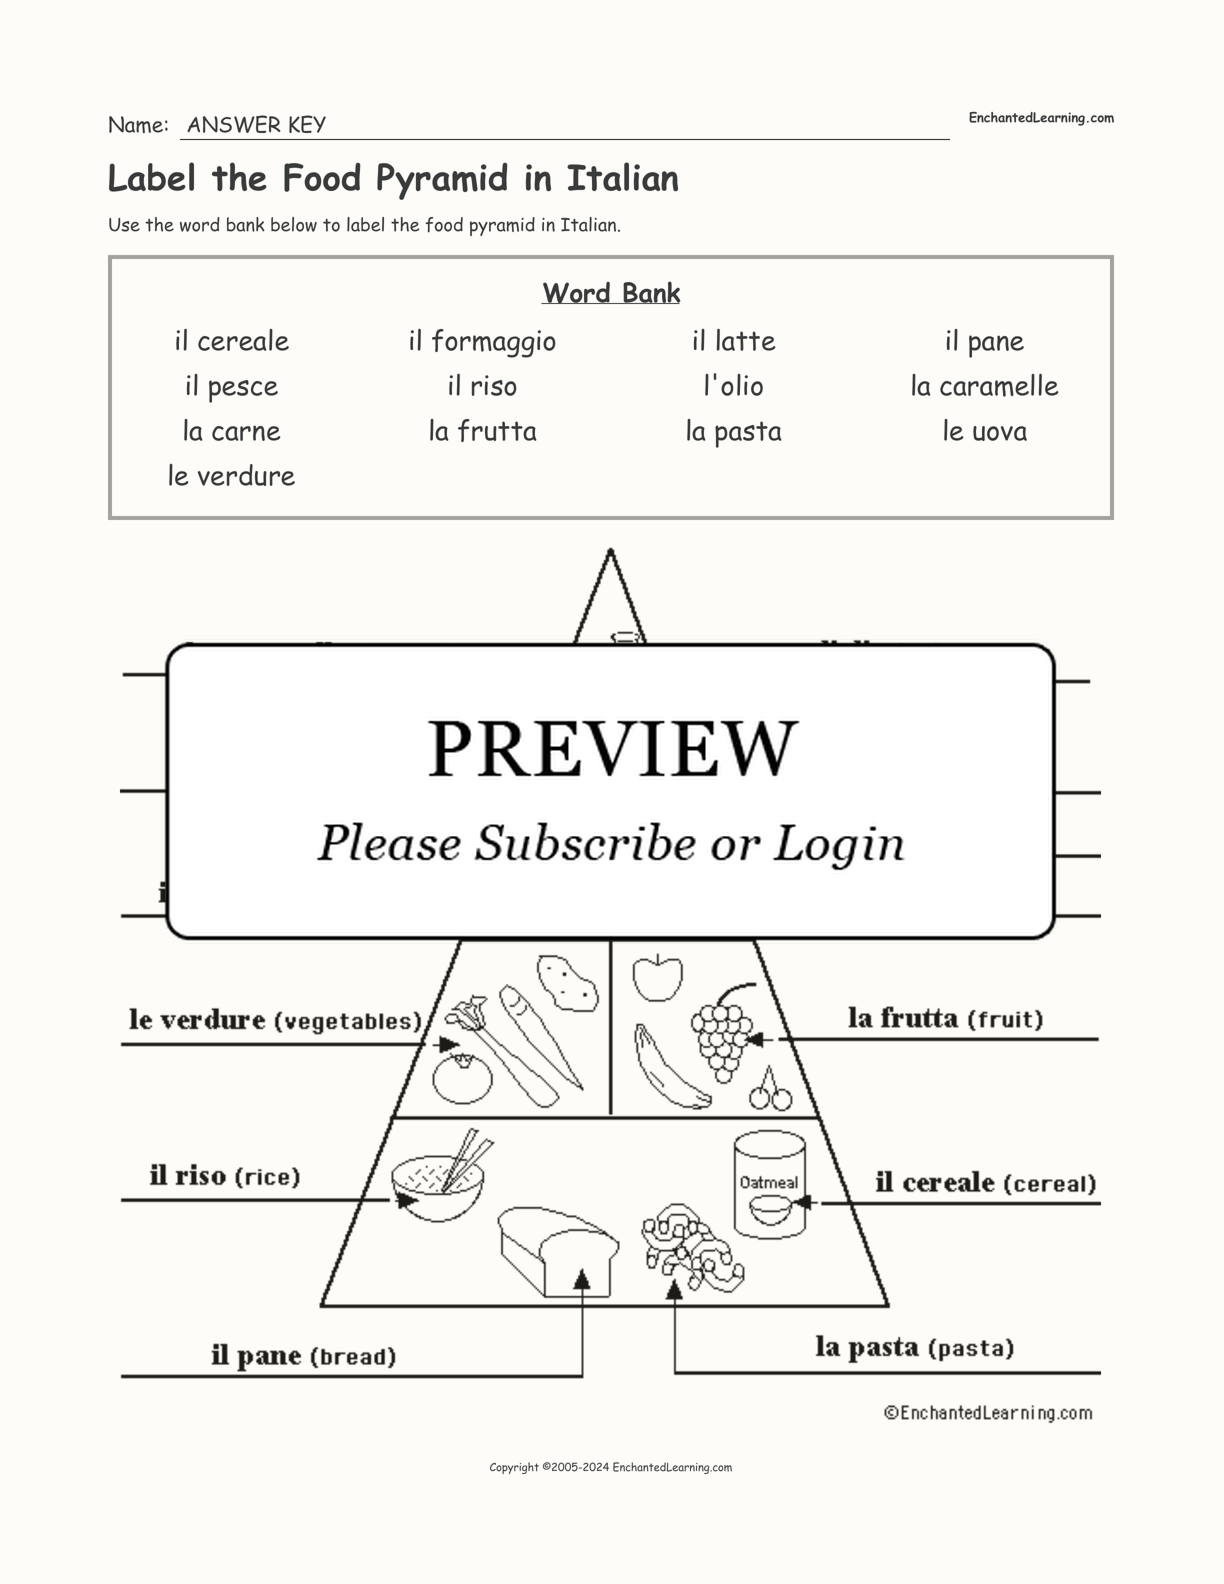 Label the Food Pyramid in Italian interactive worksheet page 2